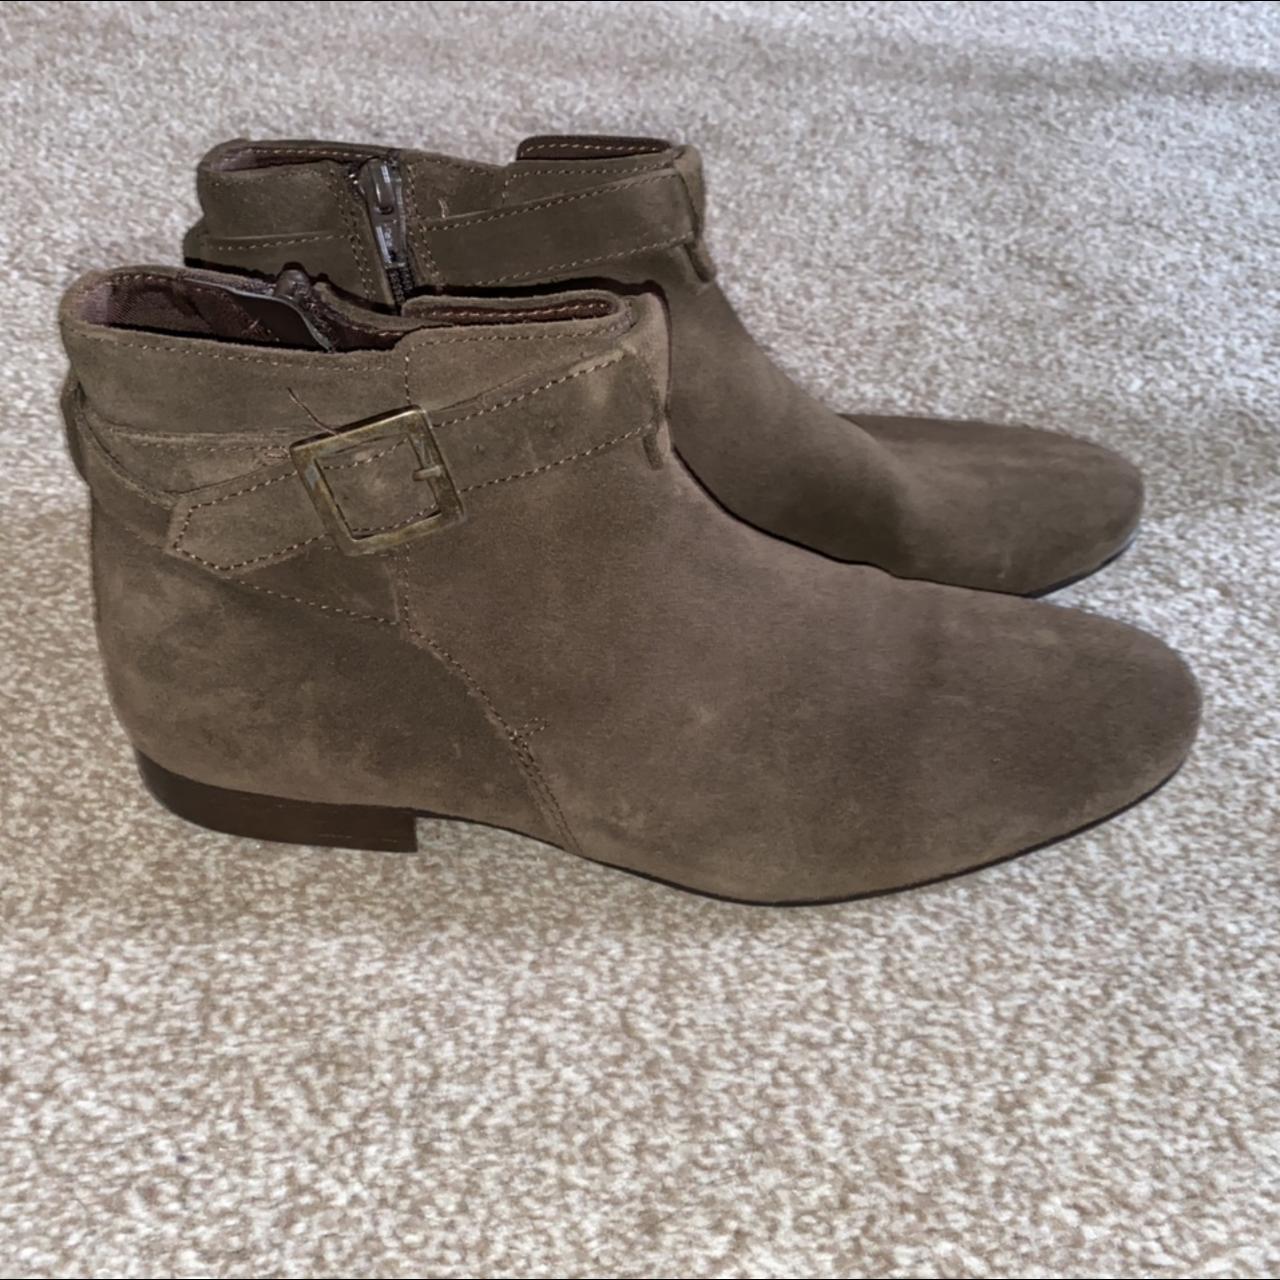 Olive Chelsea boots in great condition and for a... - Depop